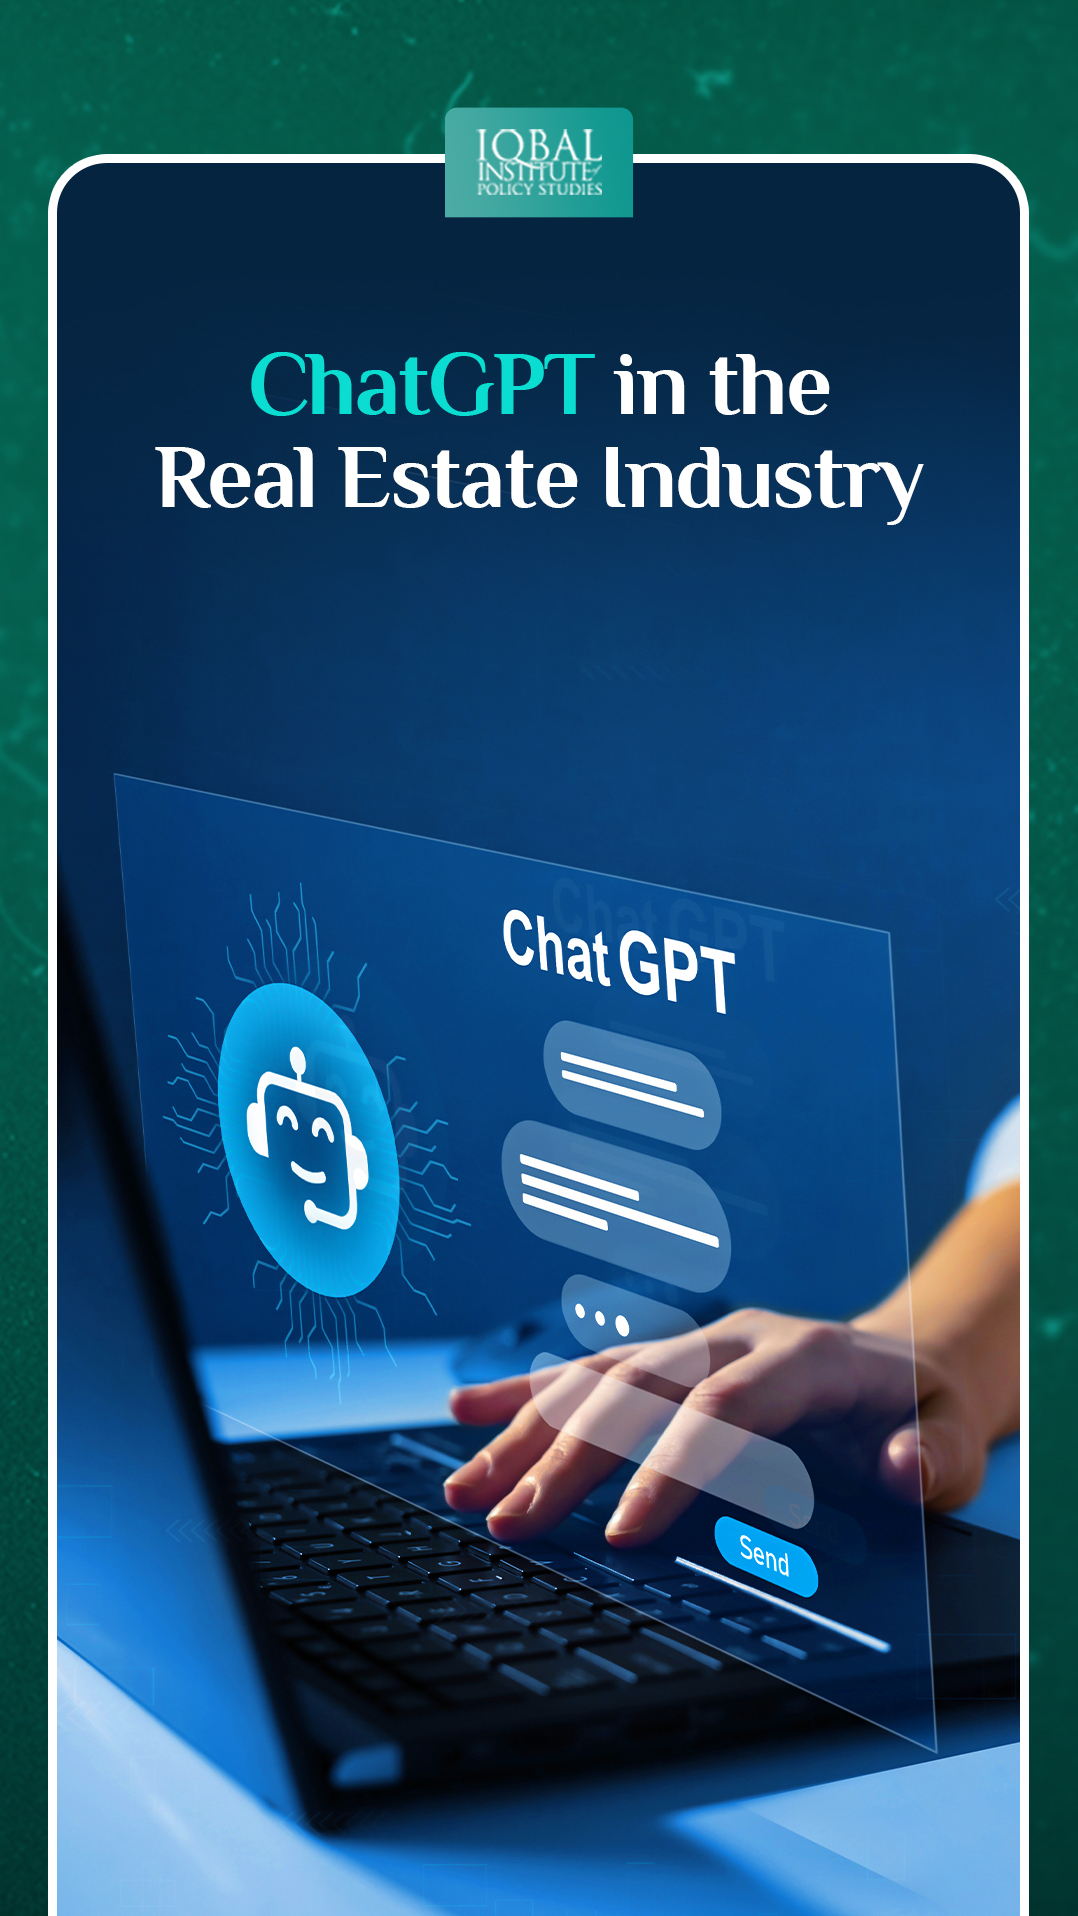 ChatGPT in the Real Estate Industry